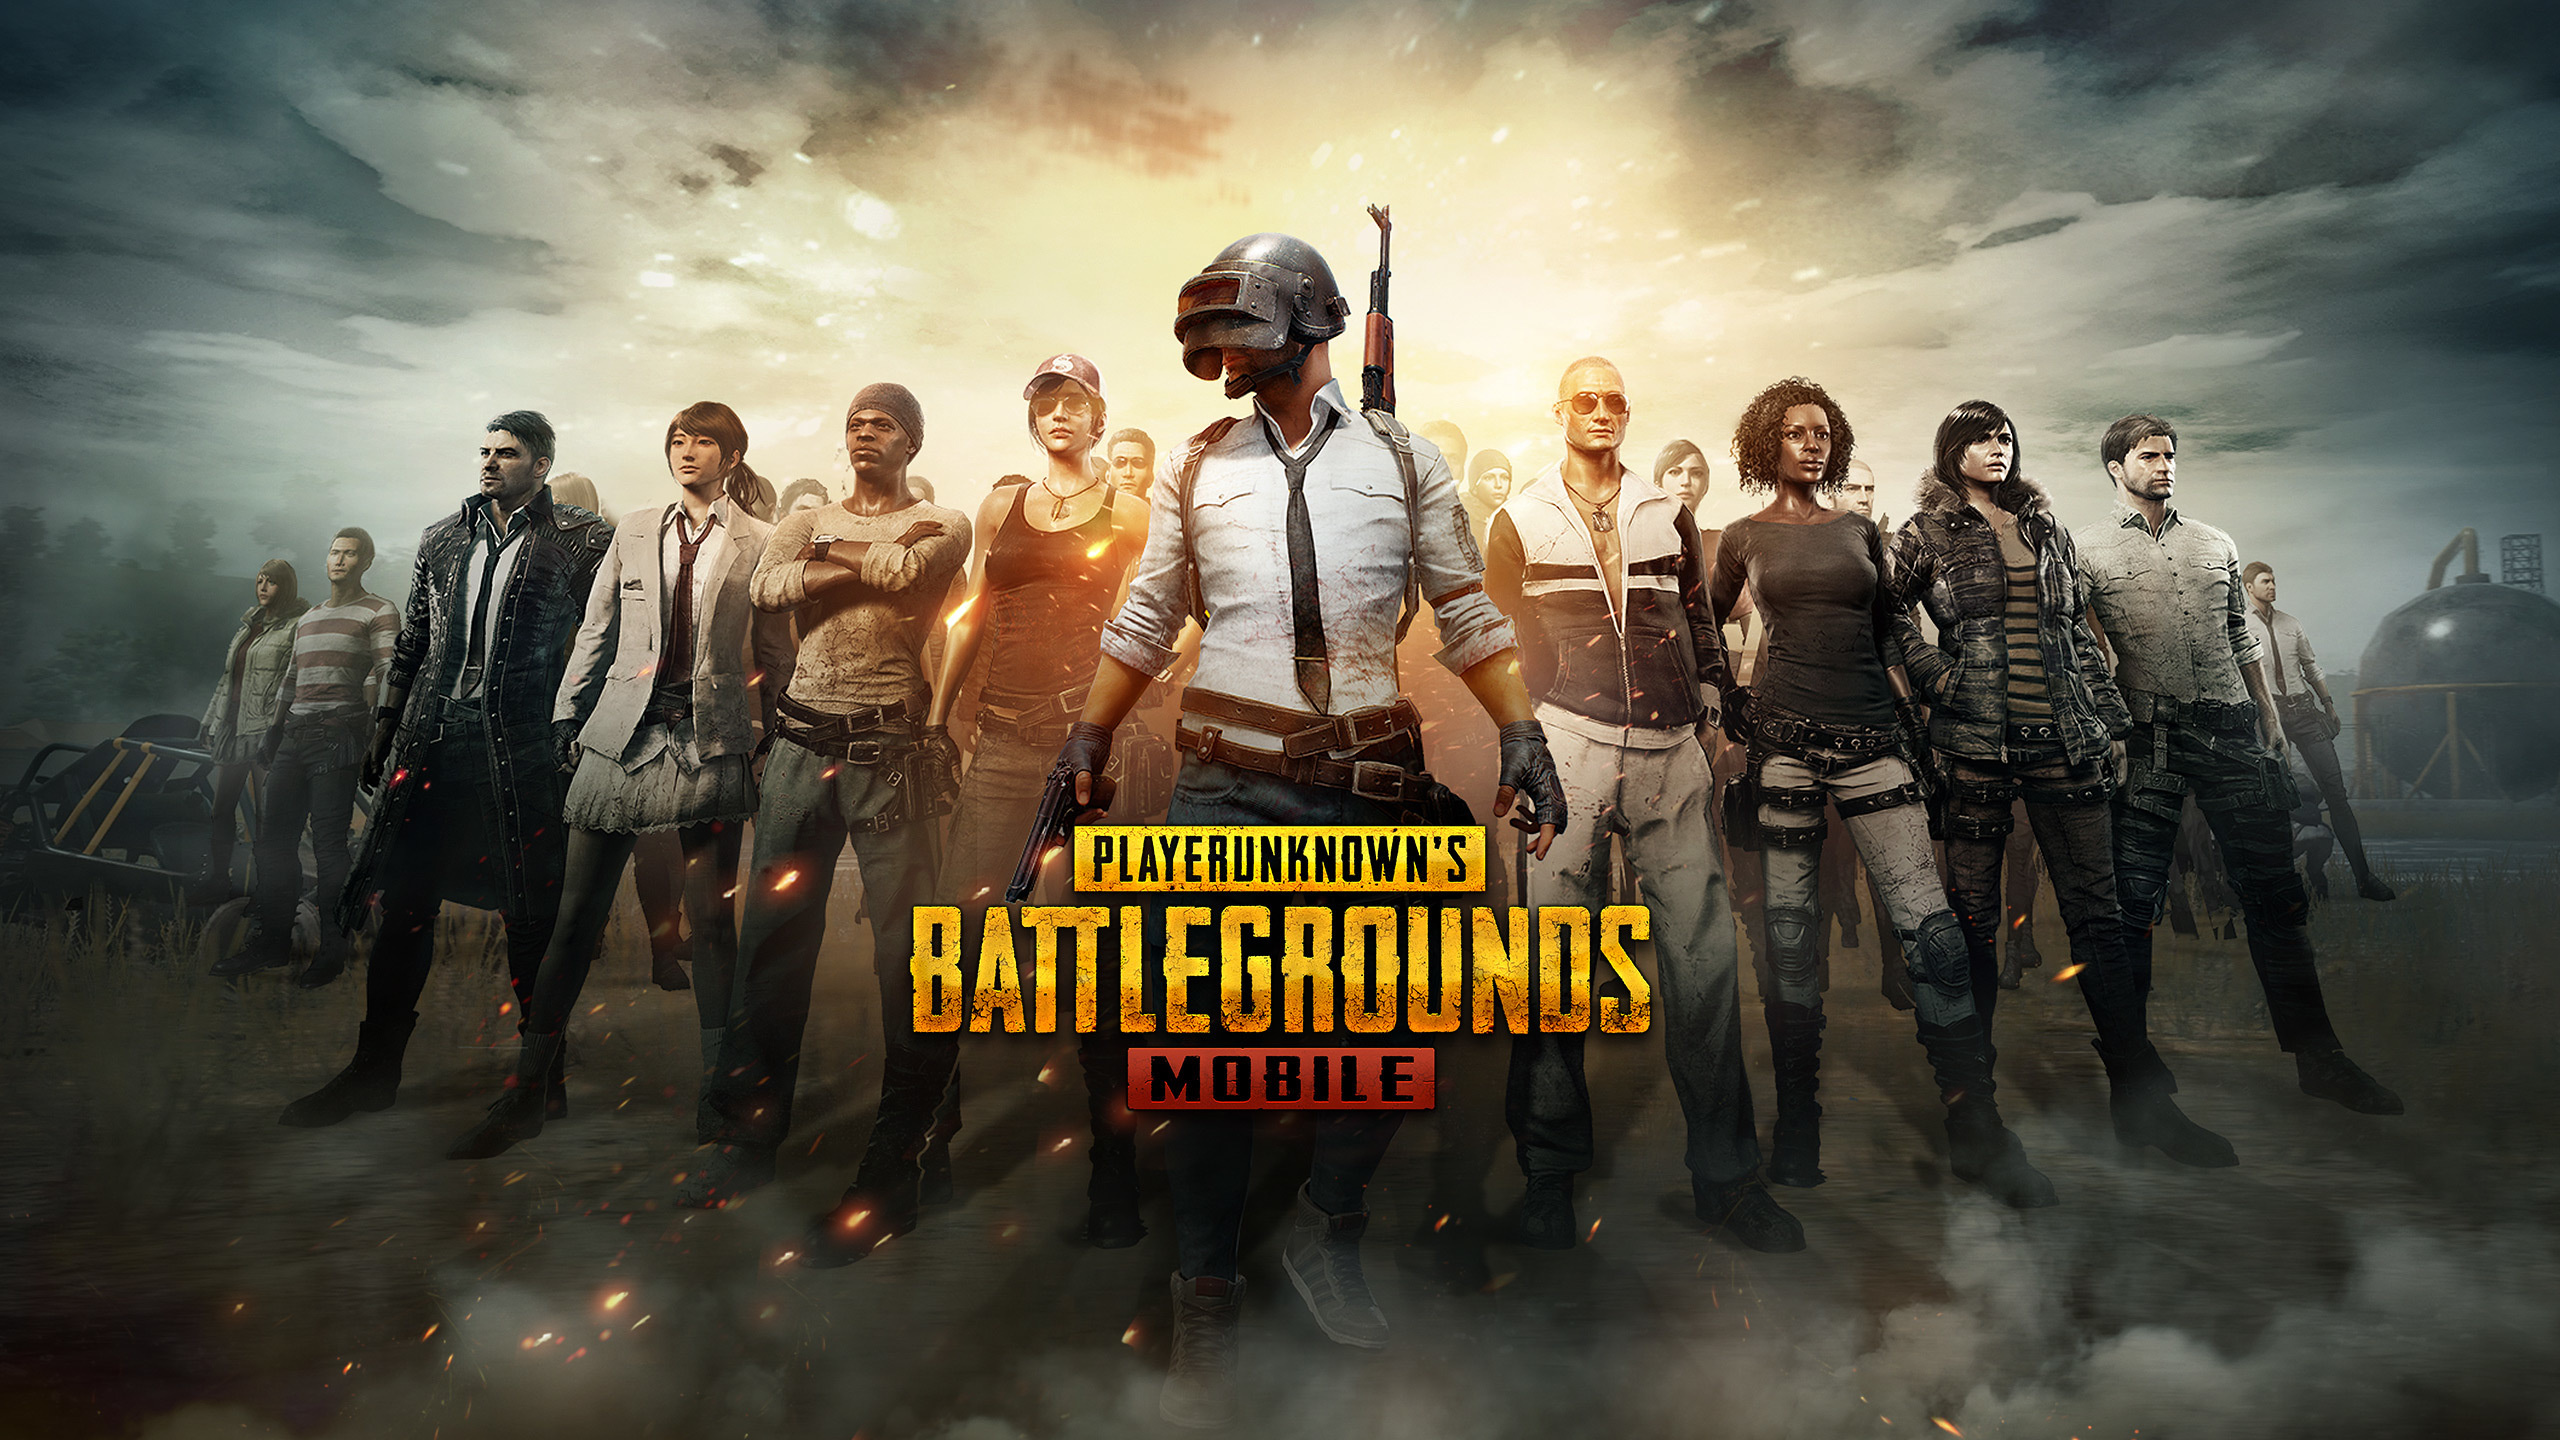 Download 2560x1440 wallpaper pubg mobile, android game